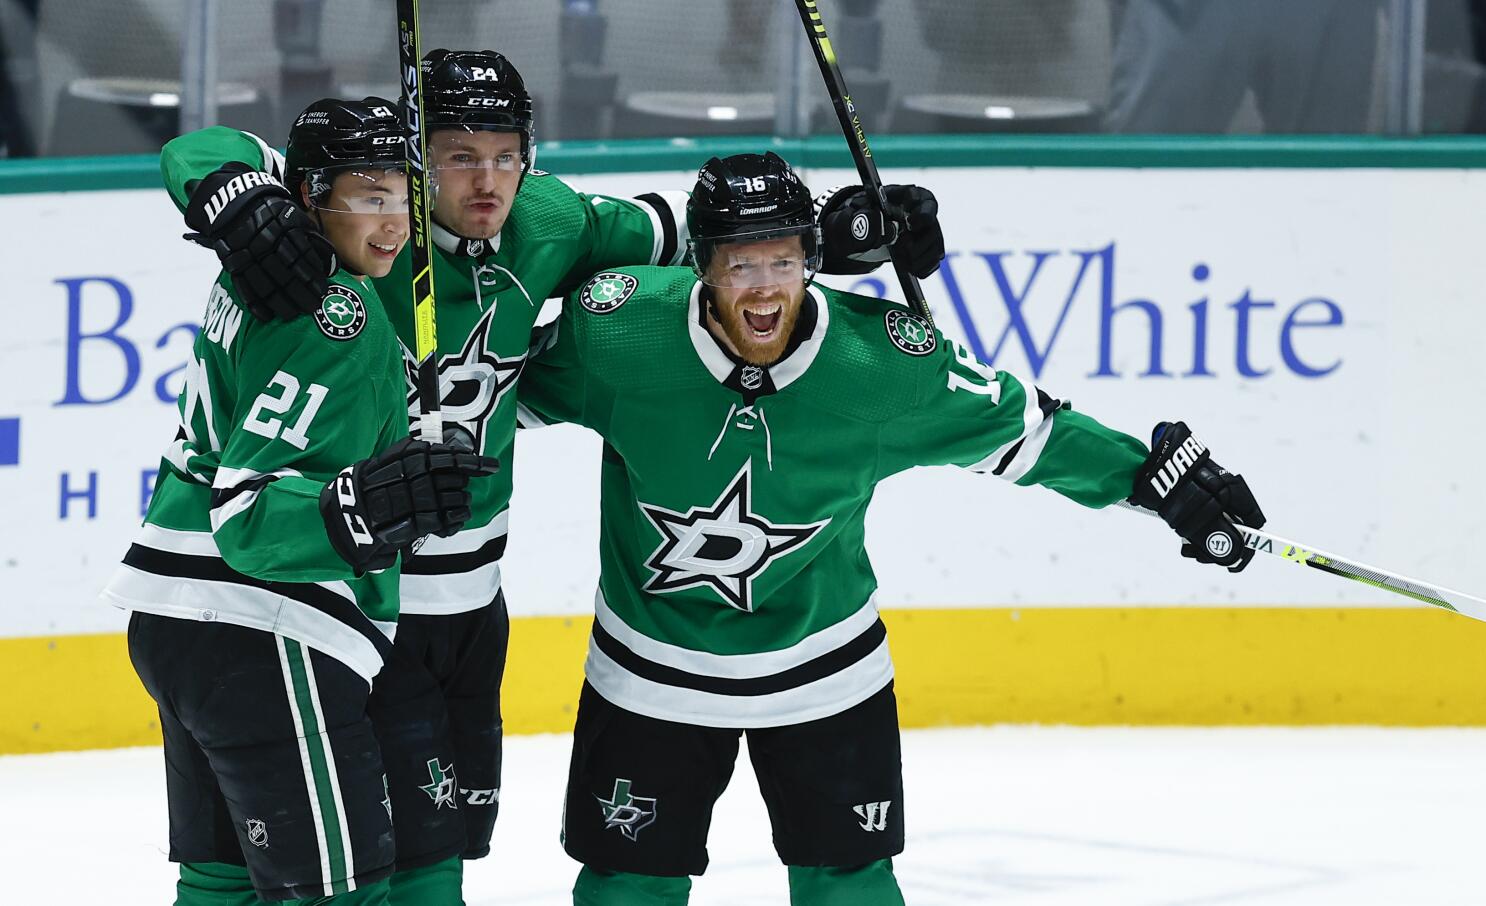 Pavelski hat trick powers Dallas to 5-2 win over Montreal